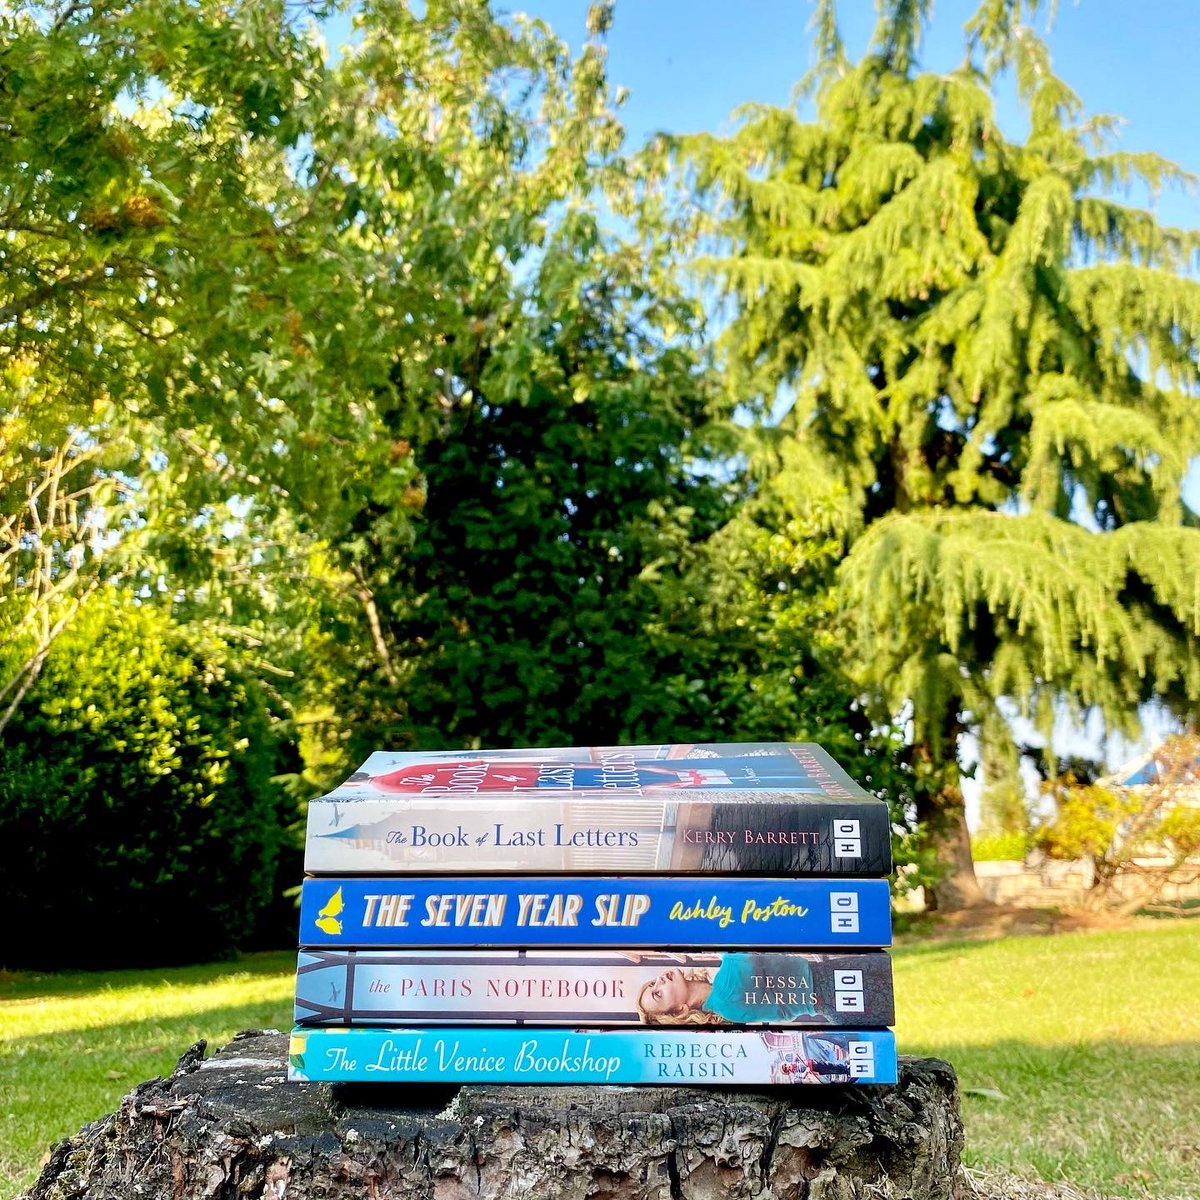 ☀️📚 COMPETITION 📚☀️ It's week 2 of #HQSummerReads, where we recommend books based on different categories. This week… books about ✨ books ✨ Follow us and RT to #win this entire stack!